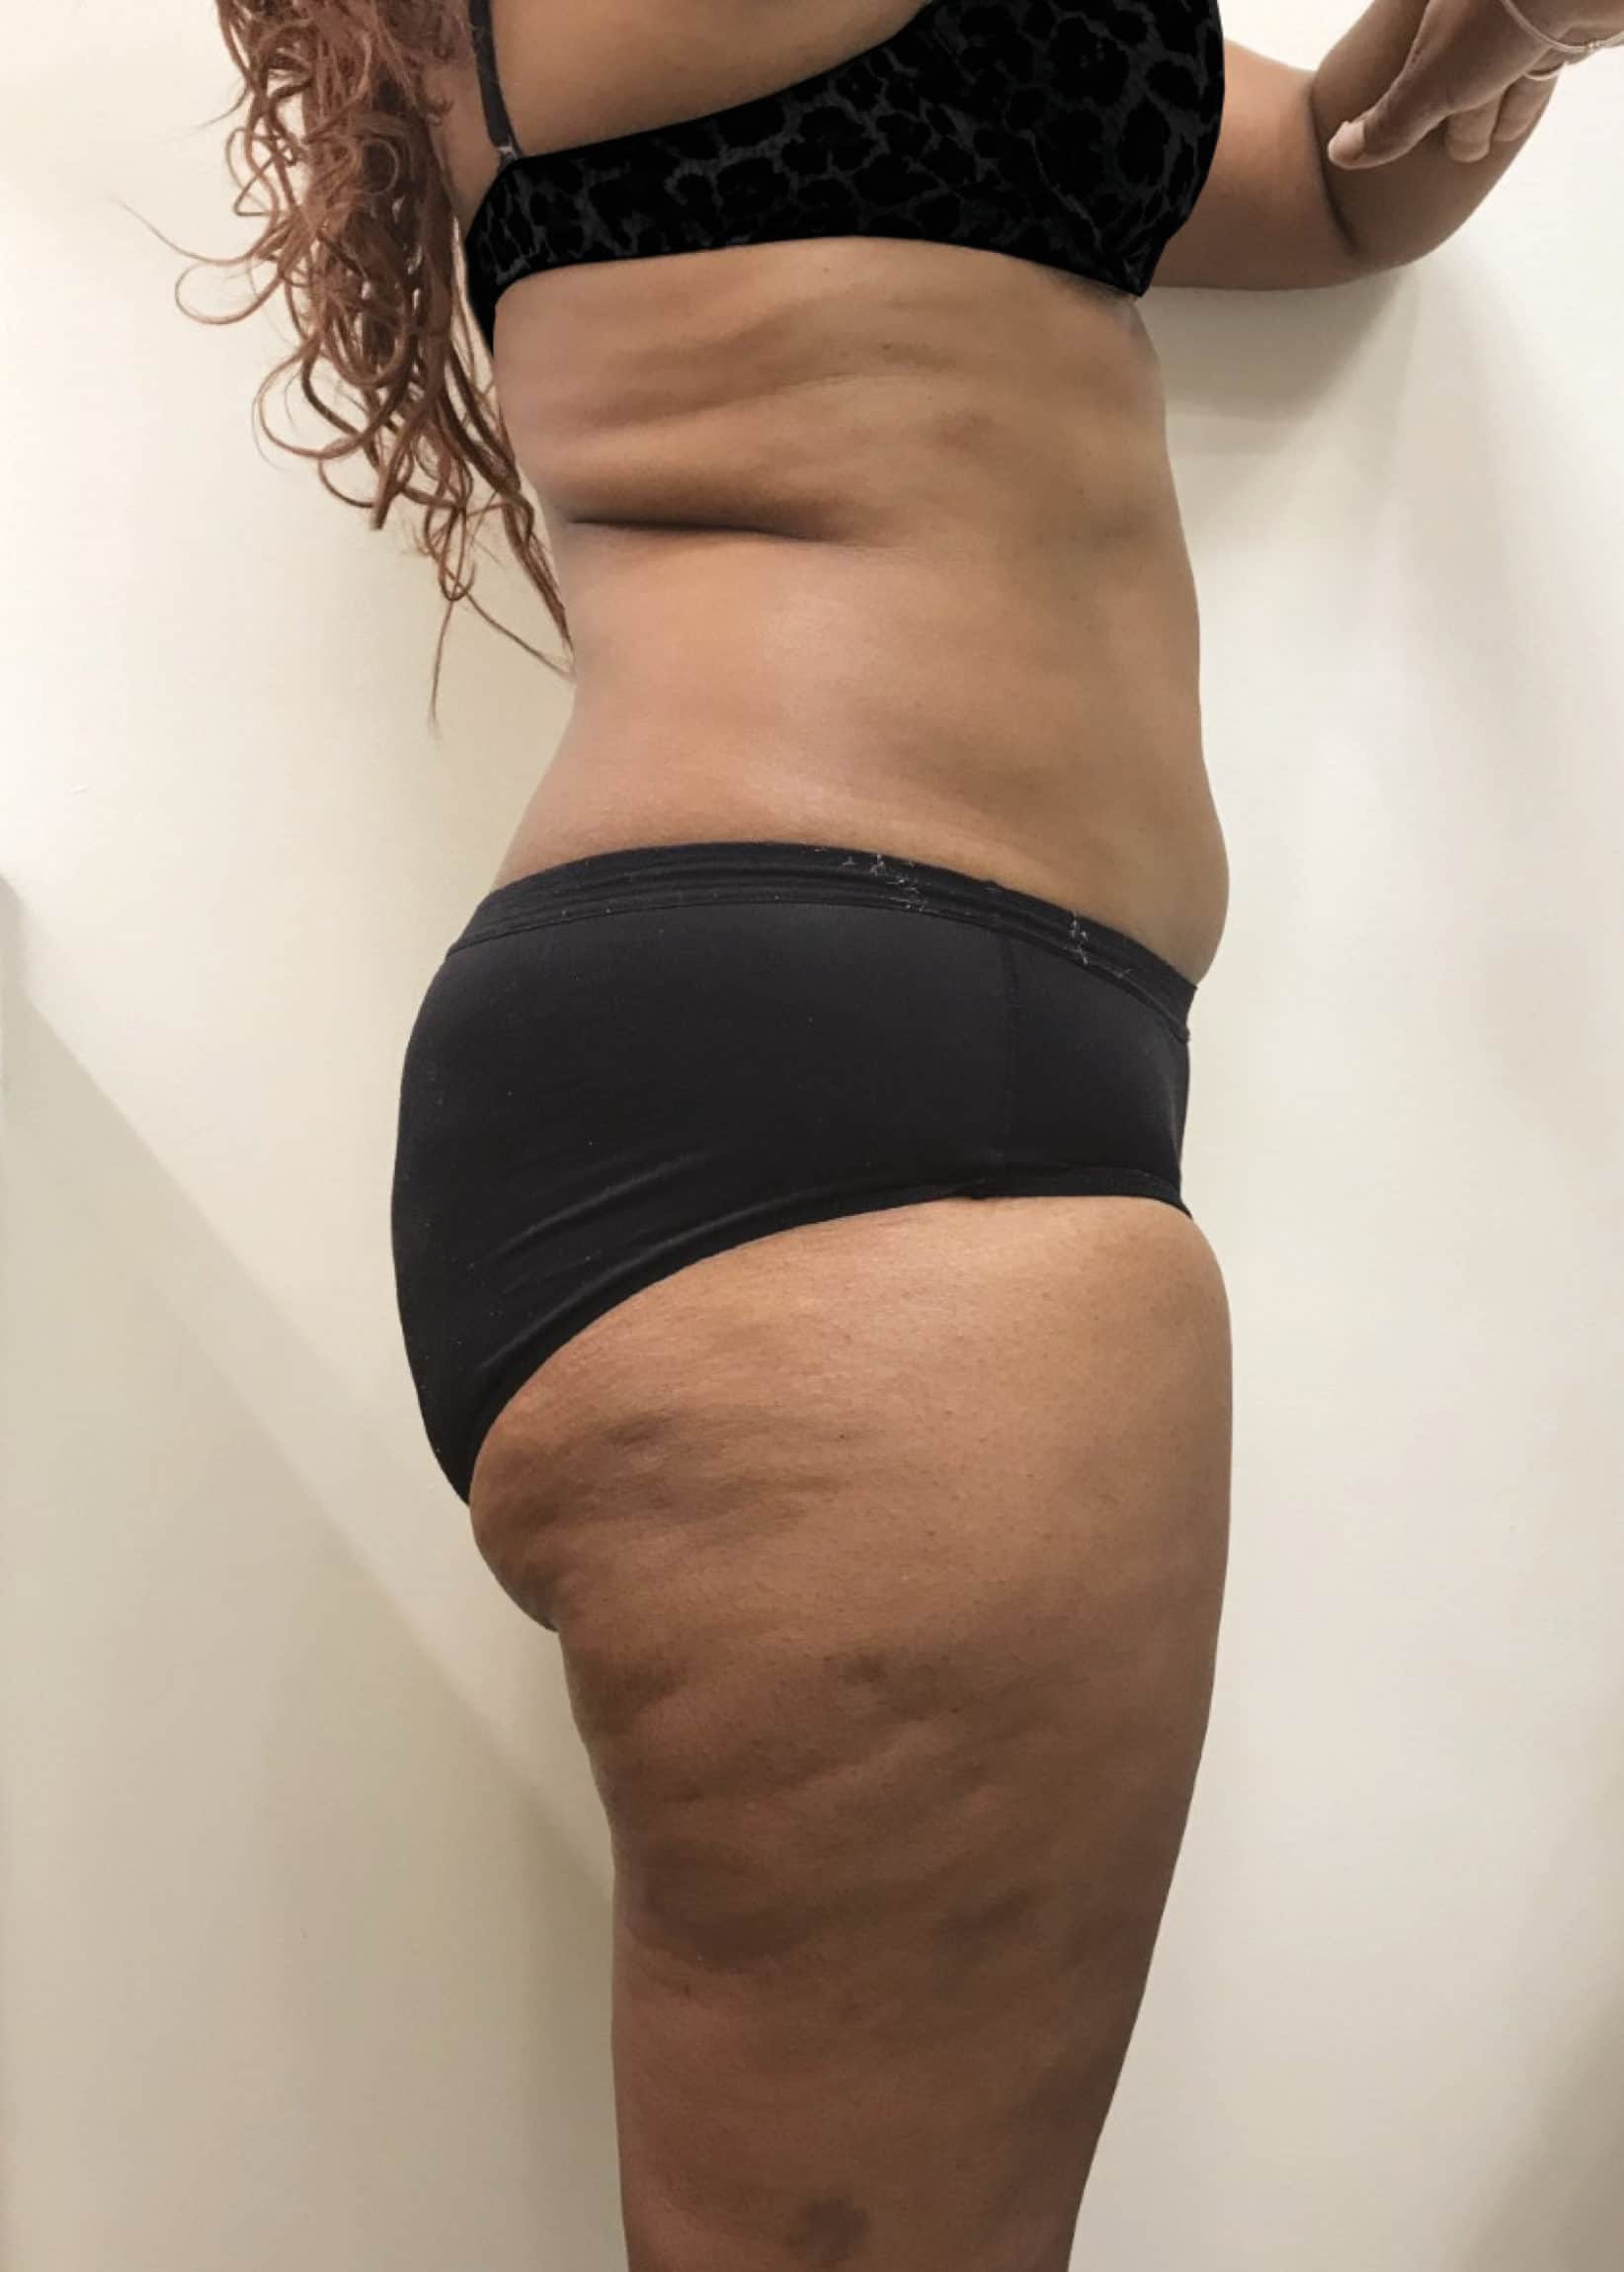 TheSkinCenter ProviderPages BrittanyOliver CoolSculpting After 2 scaled 1